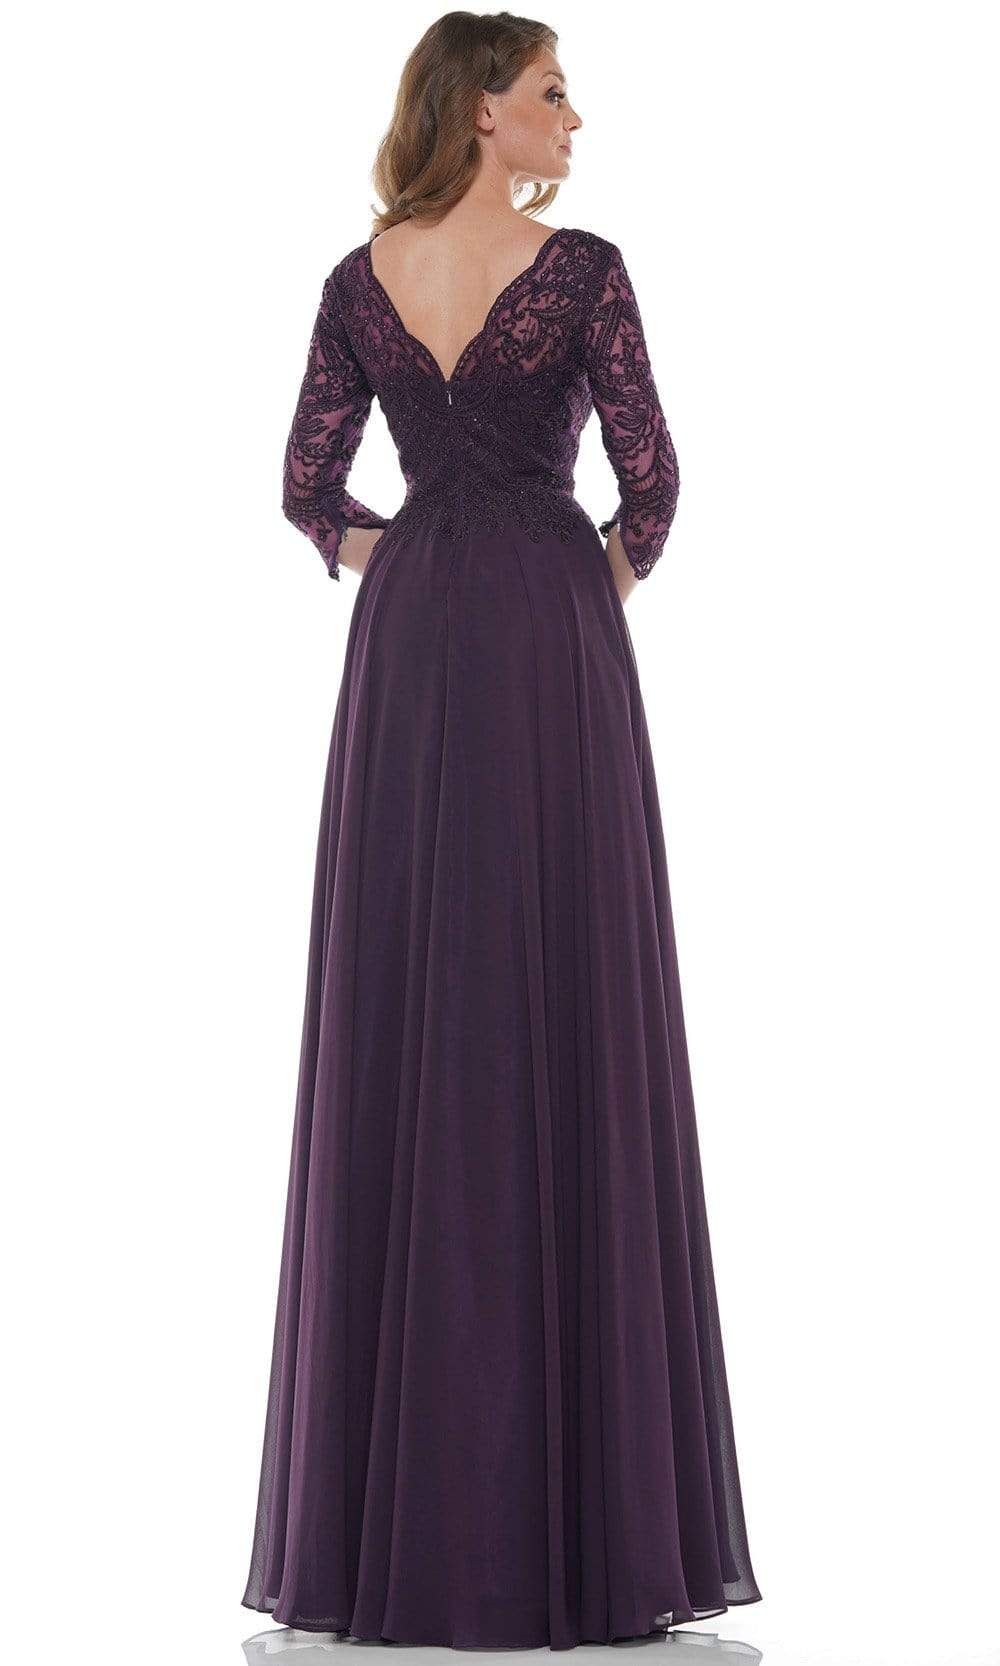 Marsoni by Colors - M238SL Embroidered Bodice Chiffon A-Line Gown Mother of the Bride Dresses